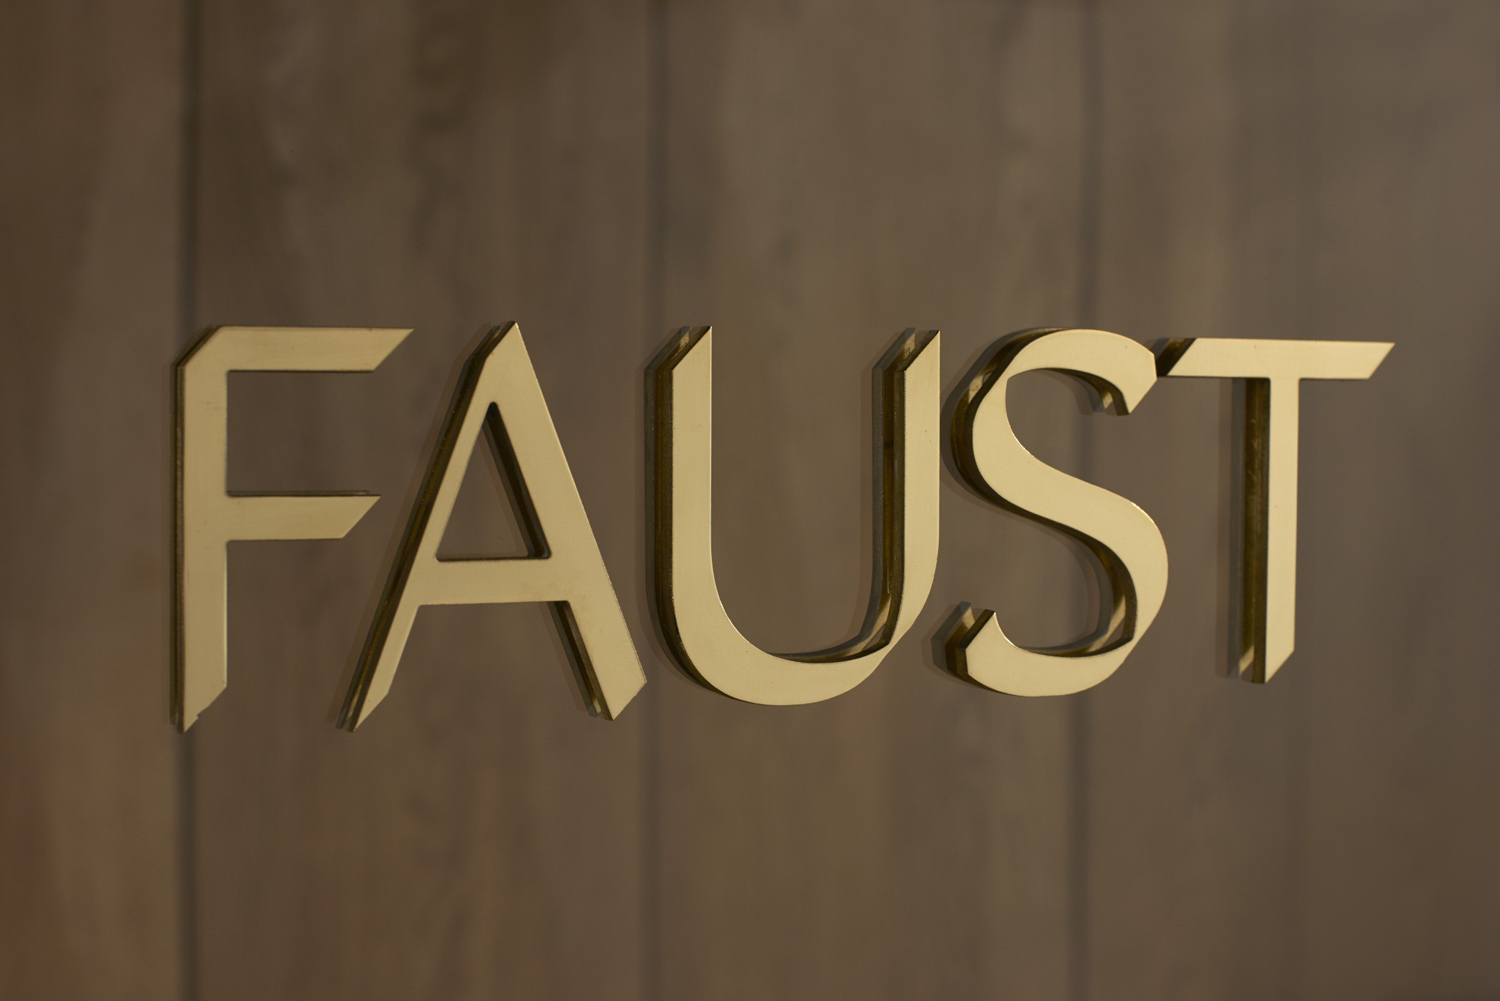 Logotype, typography, stationery and interior design by Snøhetta for Oslo-based high-end shoemaker Faust